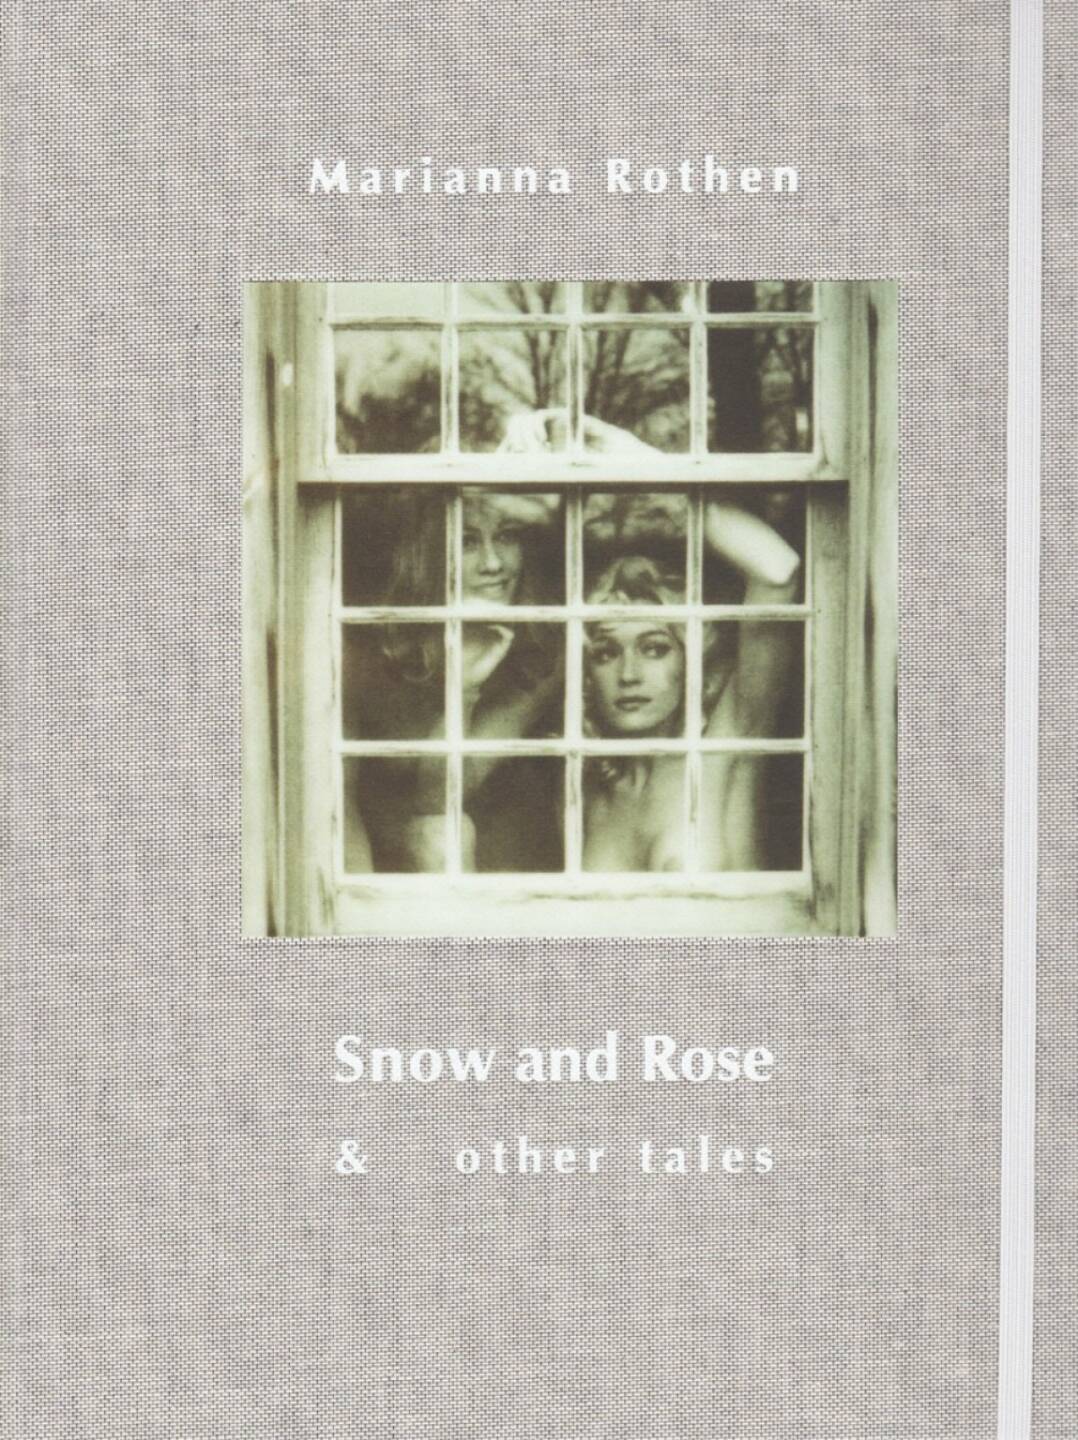 Marianna Rothen - Snow and Rose & other tales, b.frank books, 2014, http://josefchladek.com/book/marianna_rothen_-_snow_and_rose_other_tales